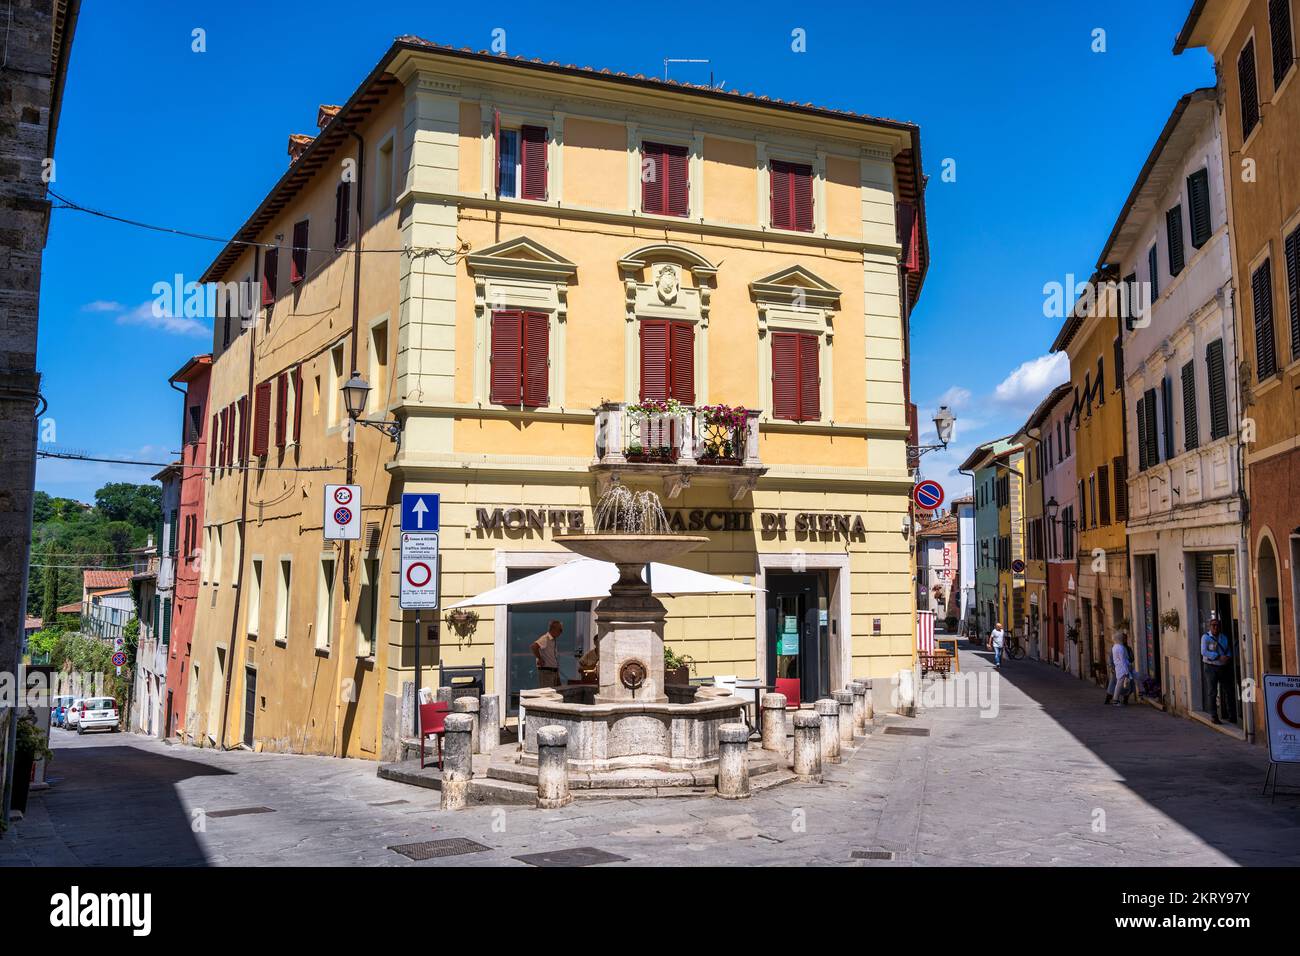 Fountain at junction of Corso Giacomo Matteotti and Via Bartolenga in medieval town of Asciano in the Crete Senesi, Province of Siena, Tuscany, Italy Stock Photo